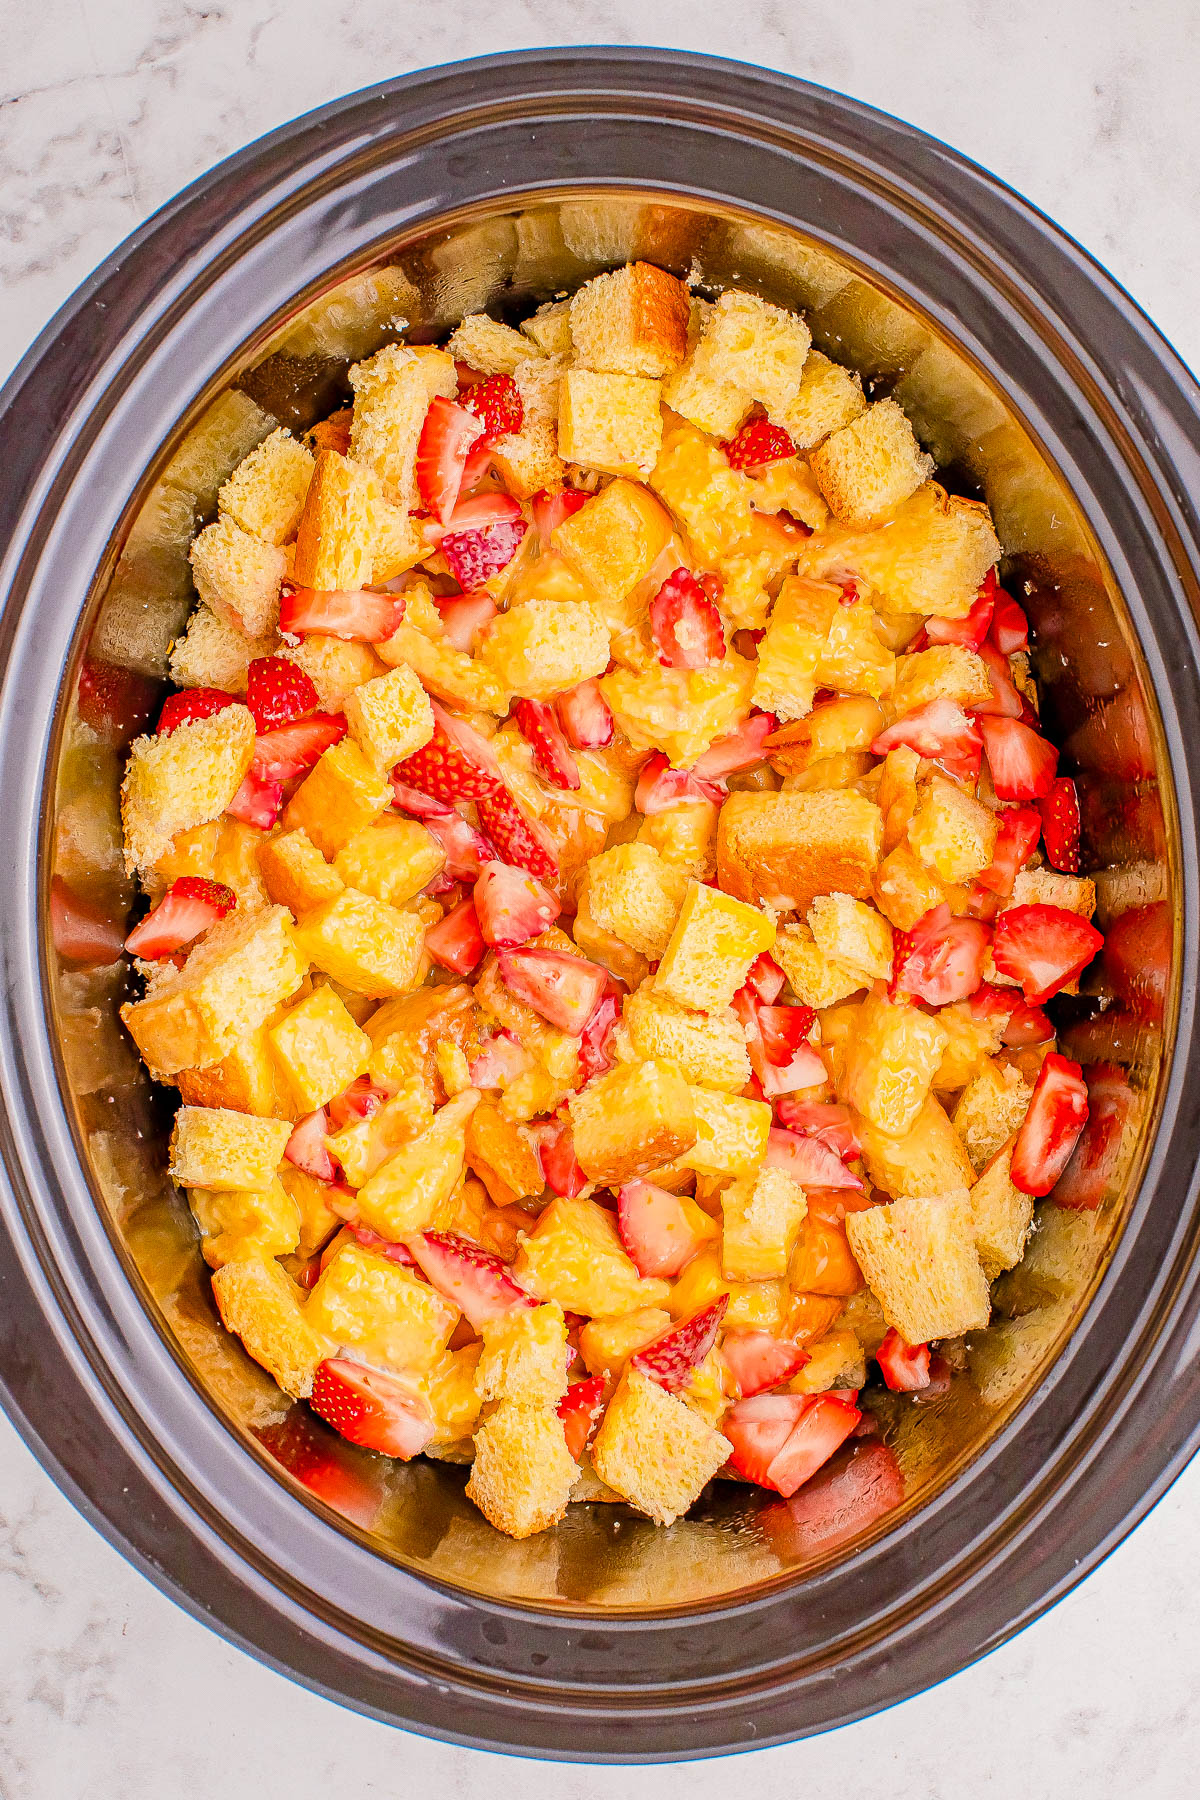 A slow cooker filled with a mixture of cubed bread, sliced strawberries, and peach chunks, set on a marble countertop.